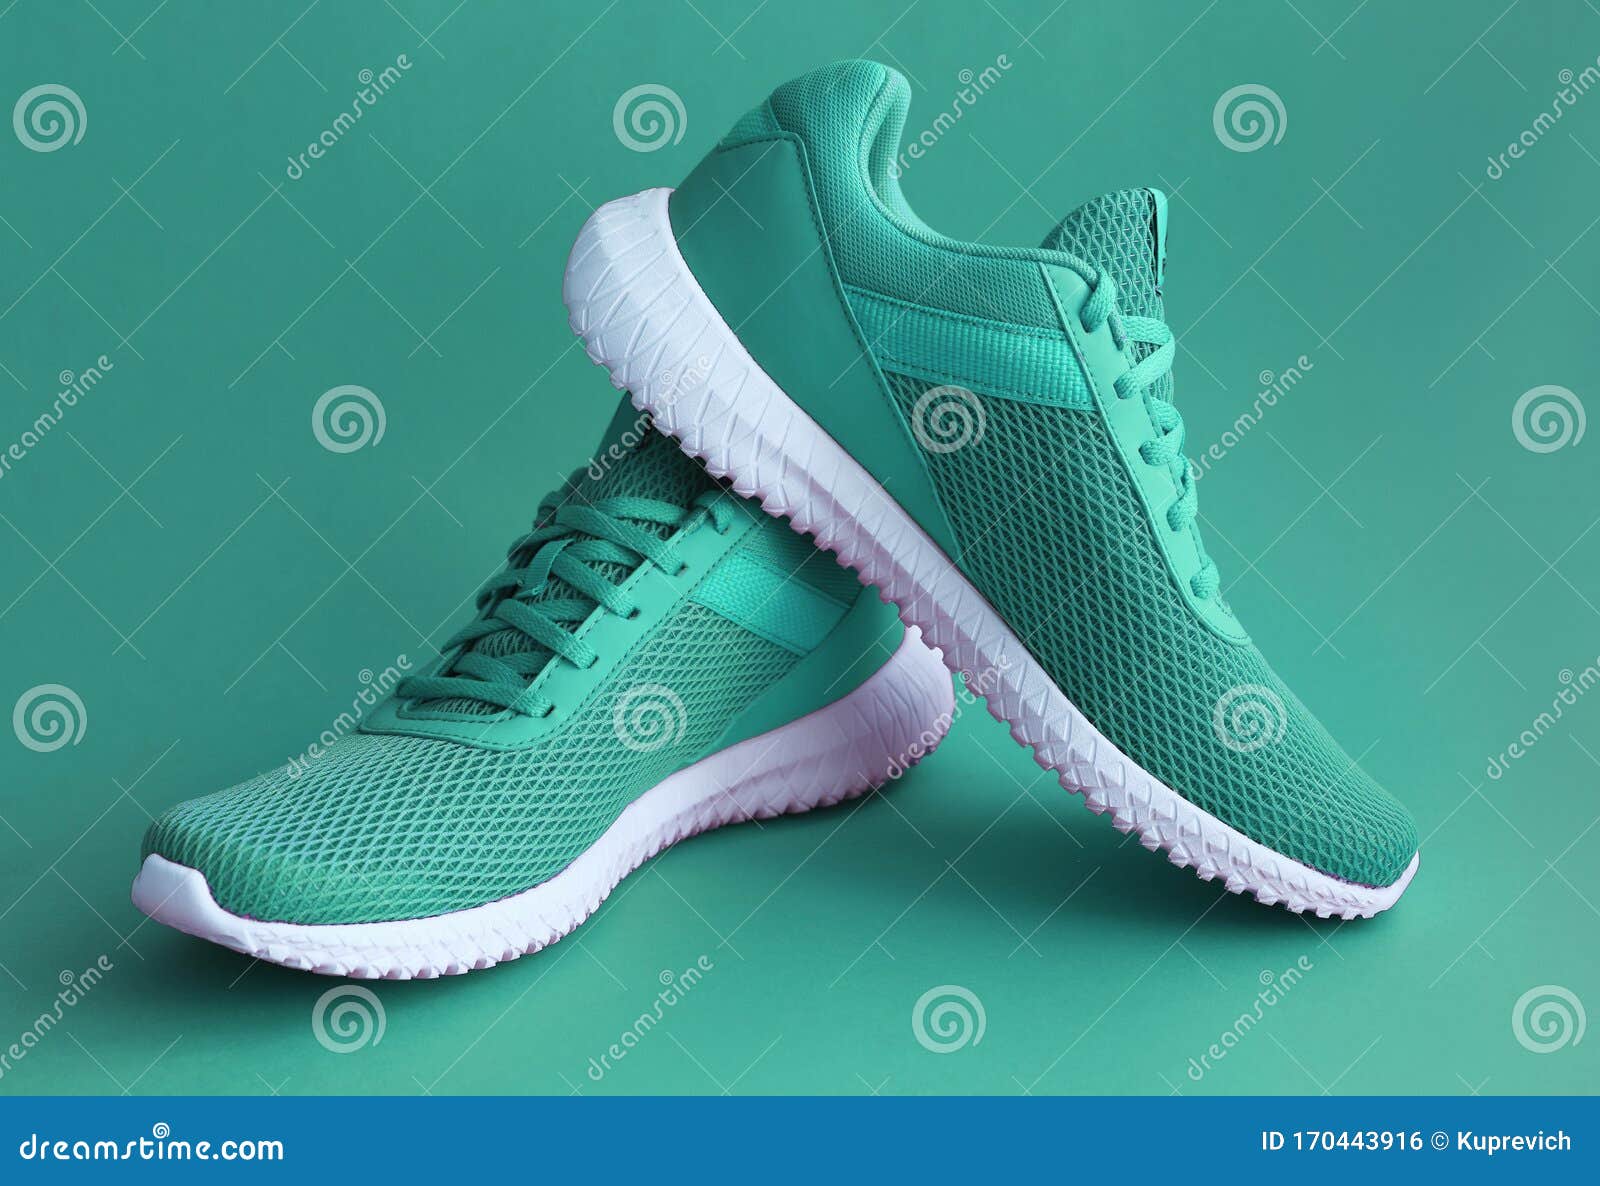 Colorful Sport Shoes on Green Color Backround Stock Photo - Image of ...